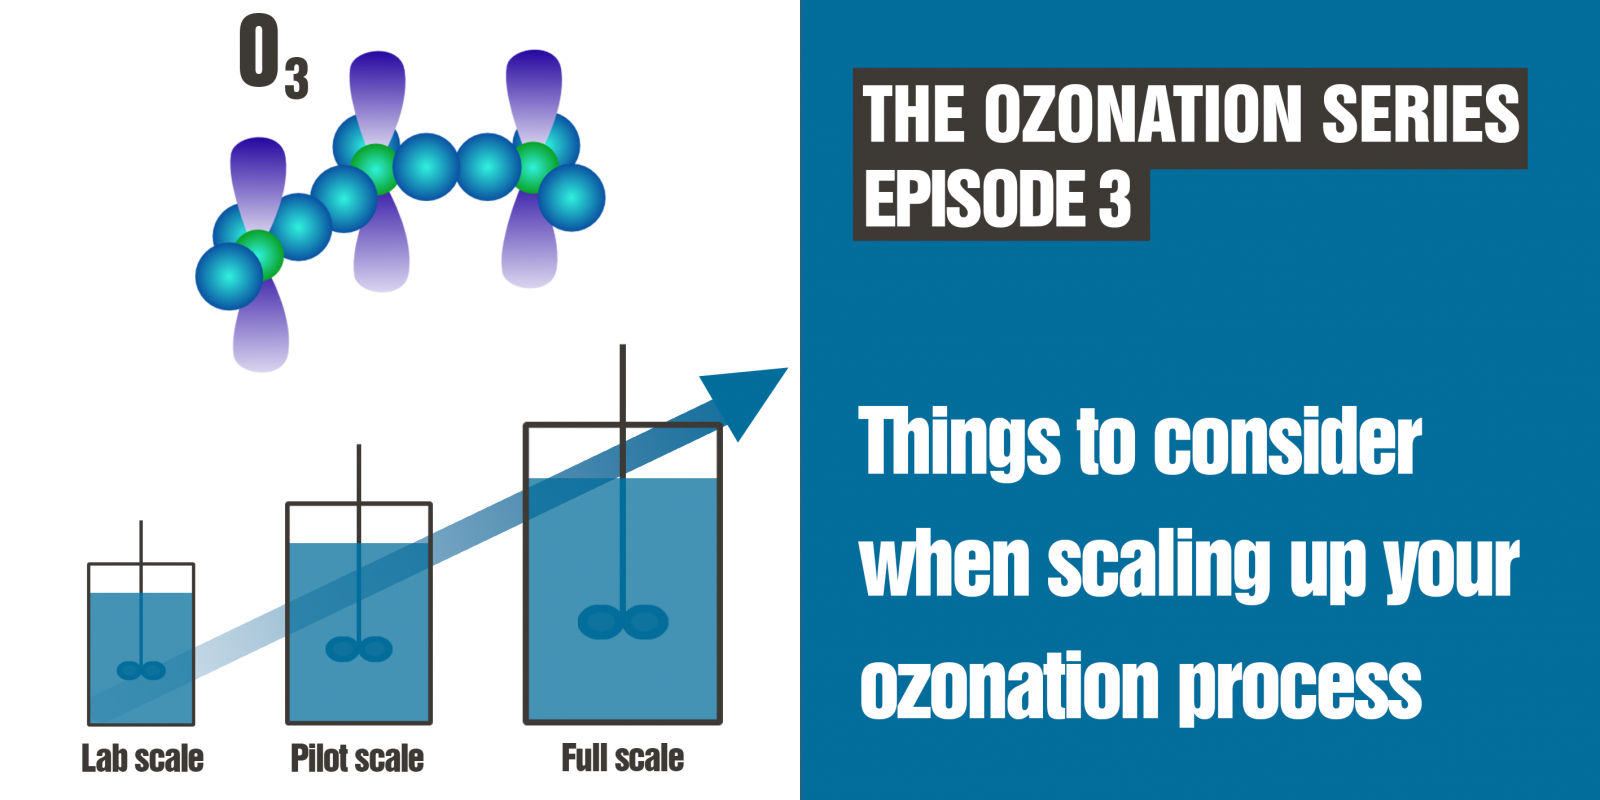 Scaling up your ozonation process